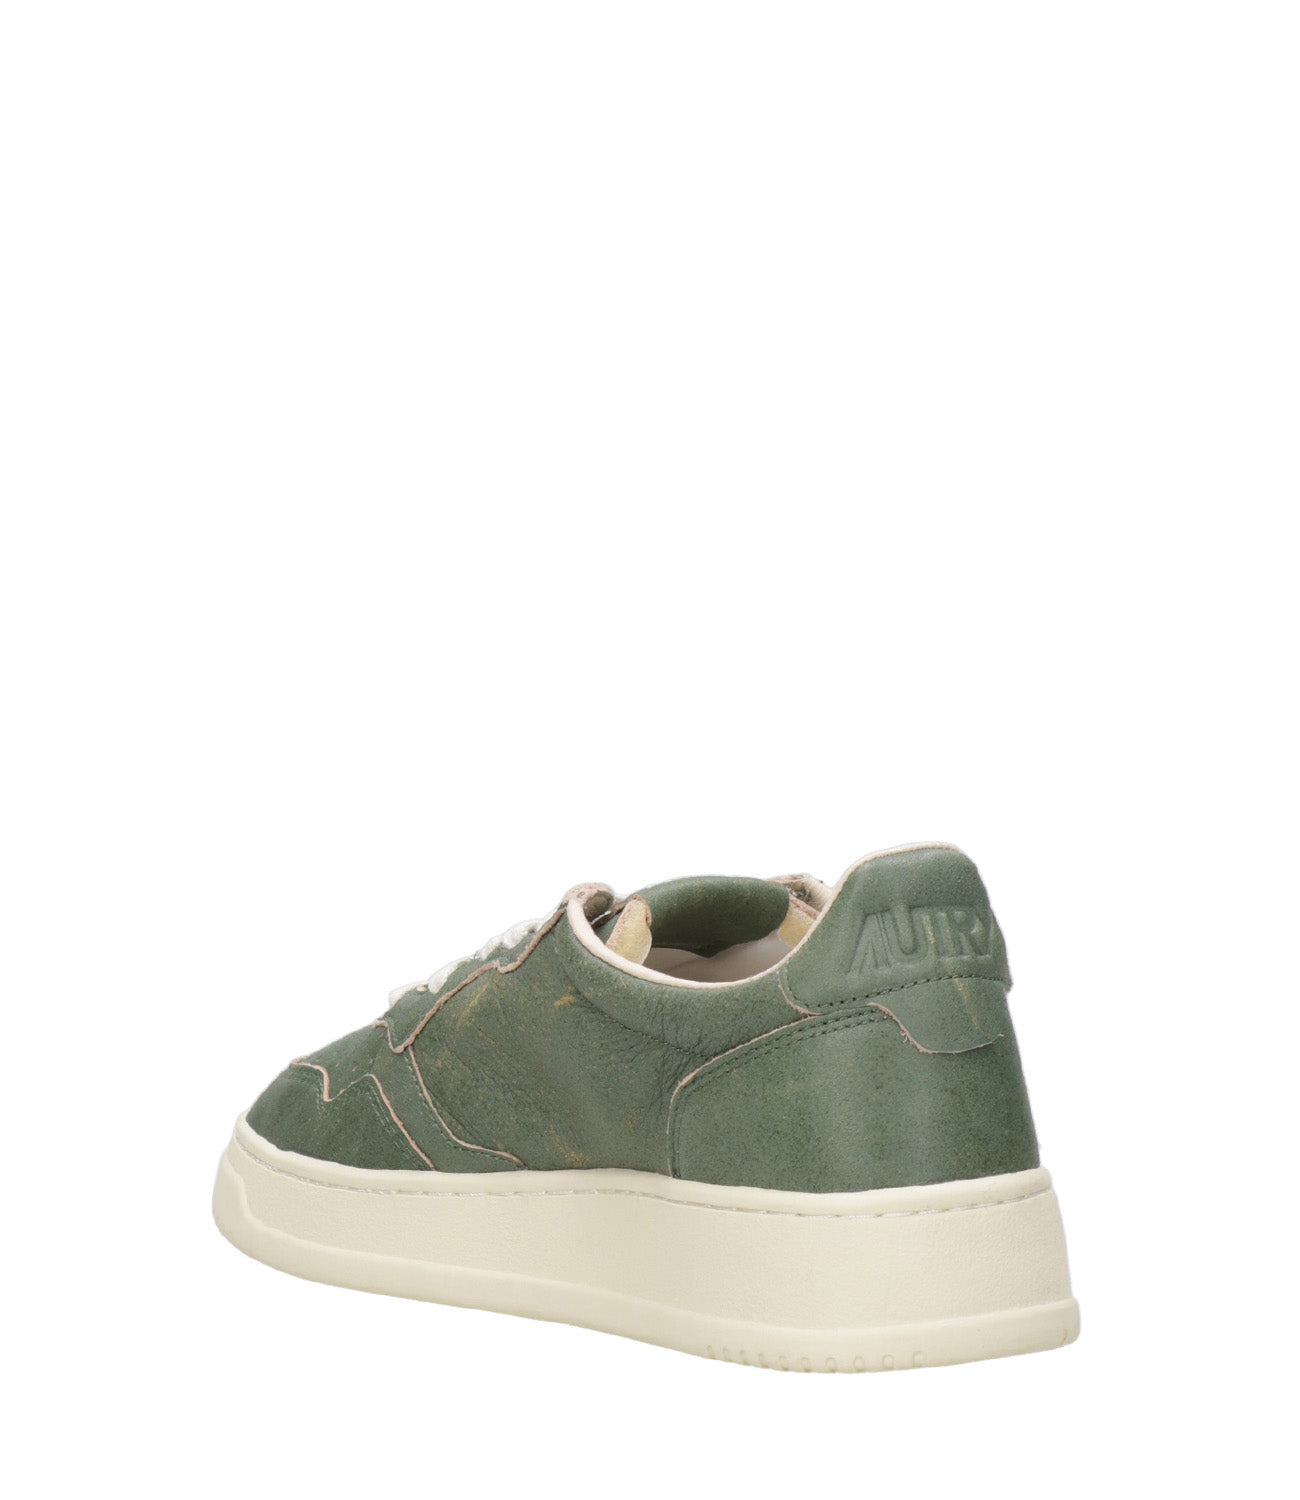 Autry | Medalist Low Sneakers Military Green